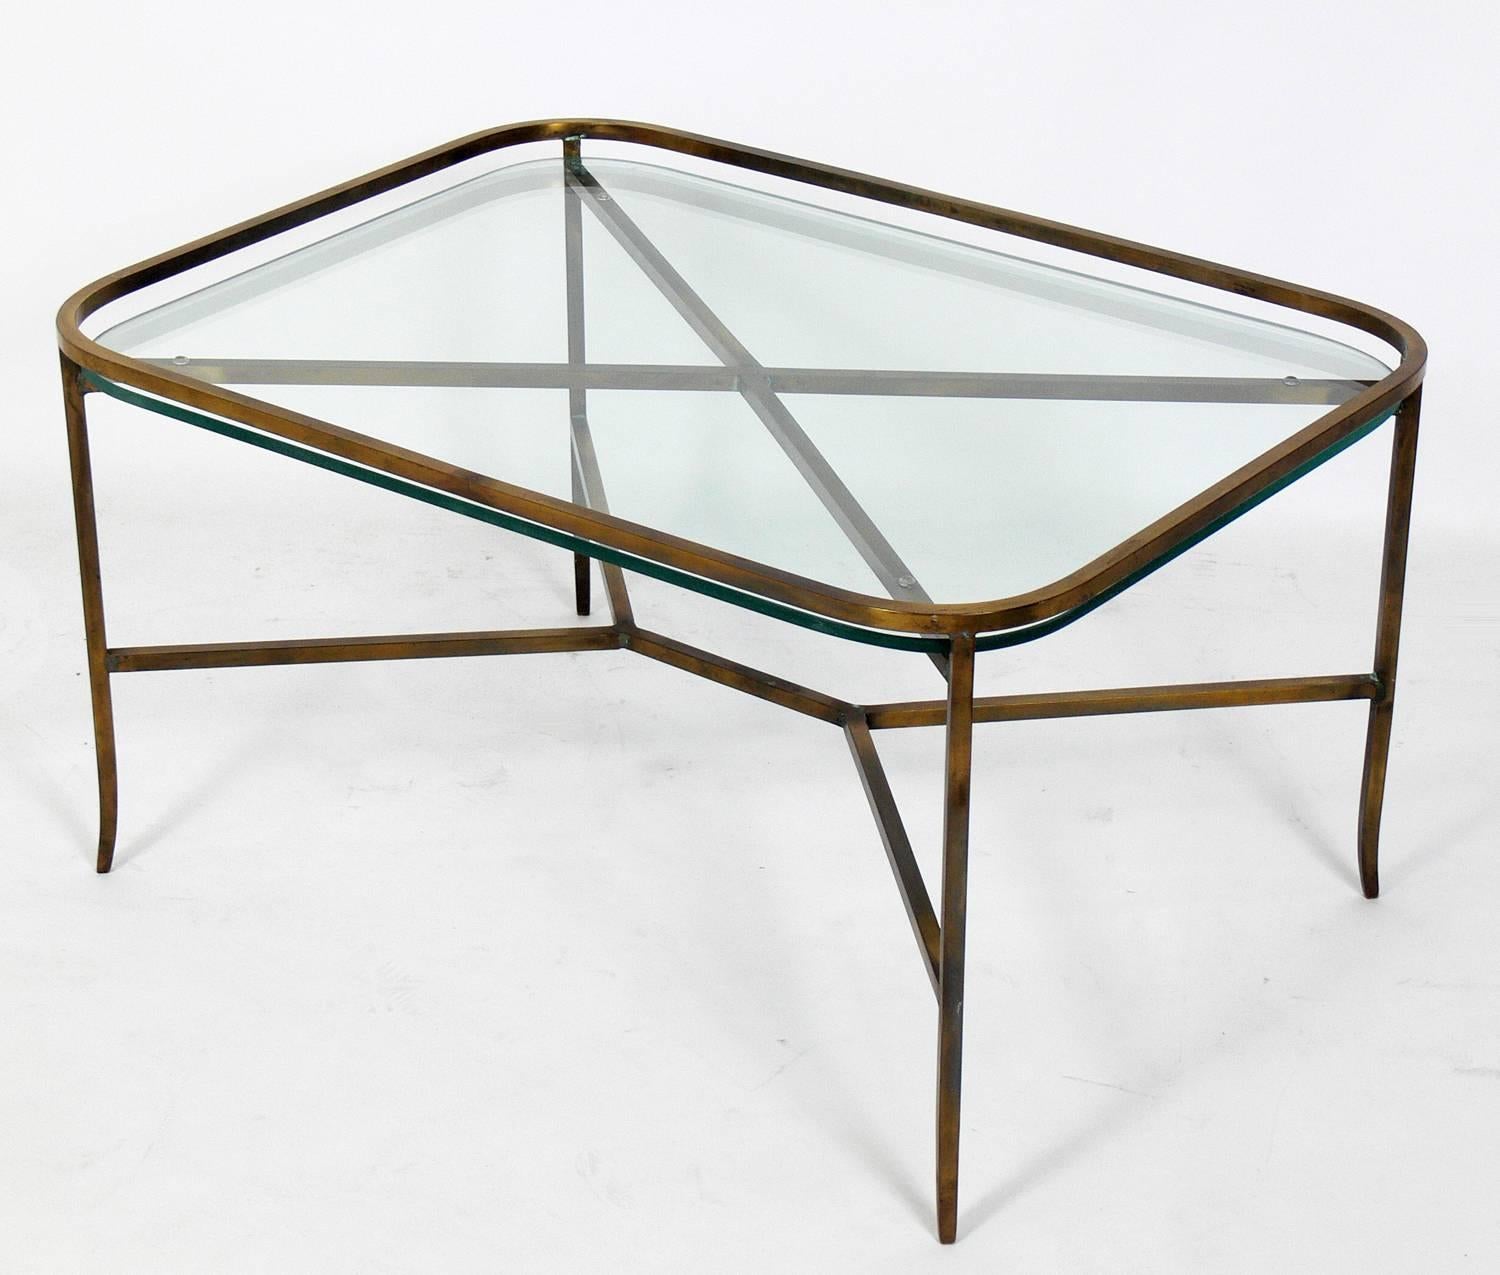 Elegant brass coffee table with inset glass top, American, circa 1950s. It is a very heavyweight quality piece. Retains it's warm original patina.